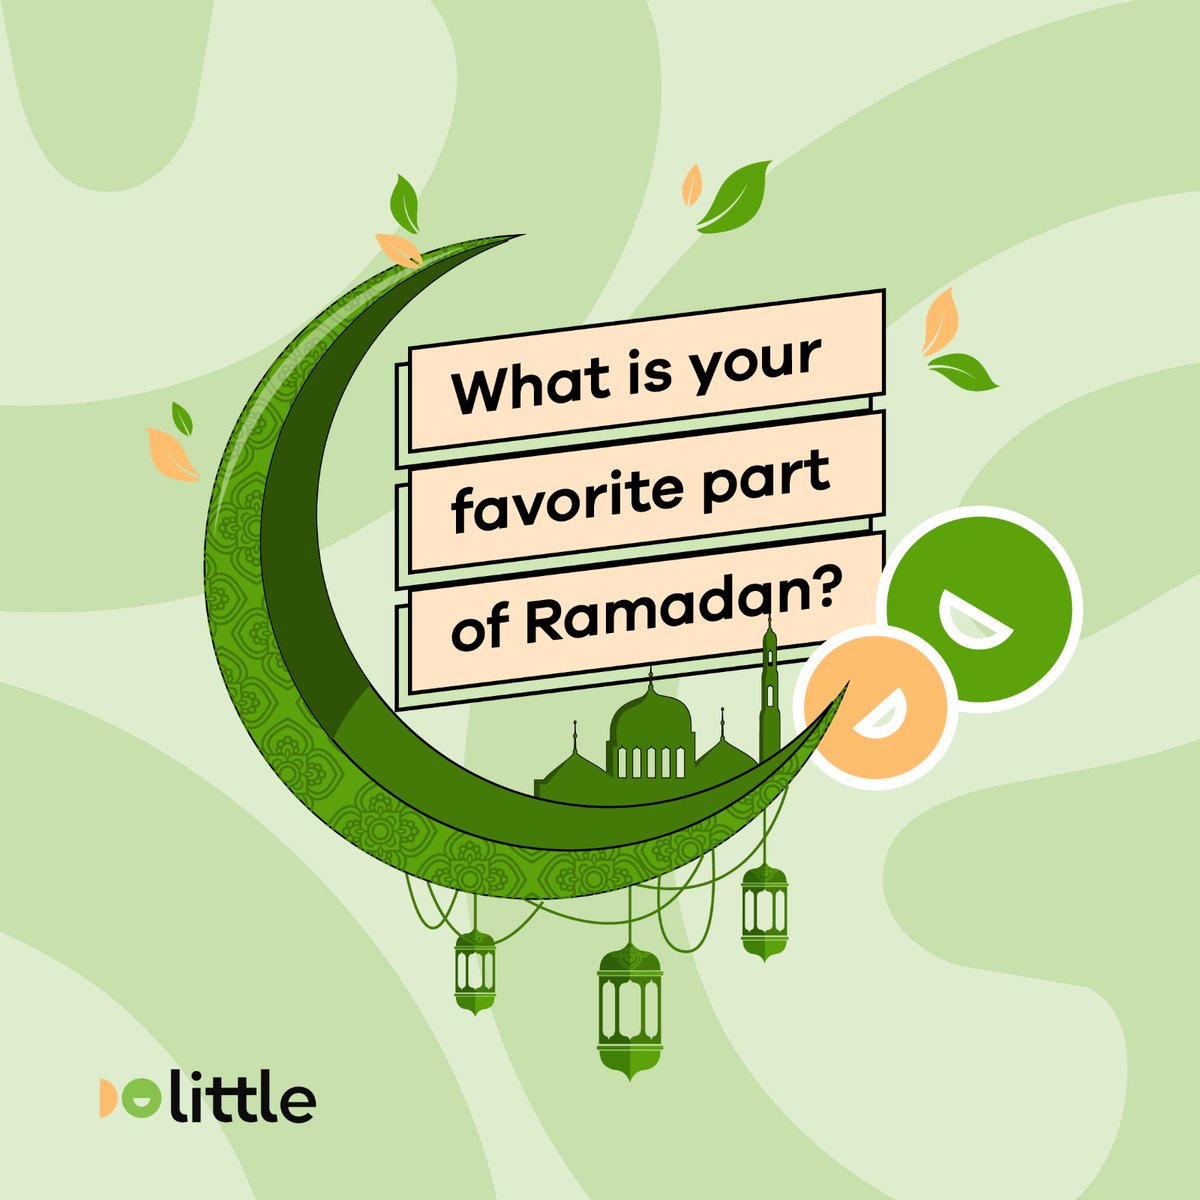 It's the 5th Day of Ramadan
What is your favorite part of  Ramadan?